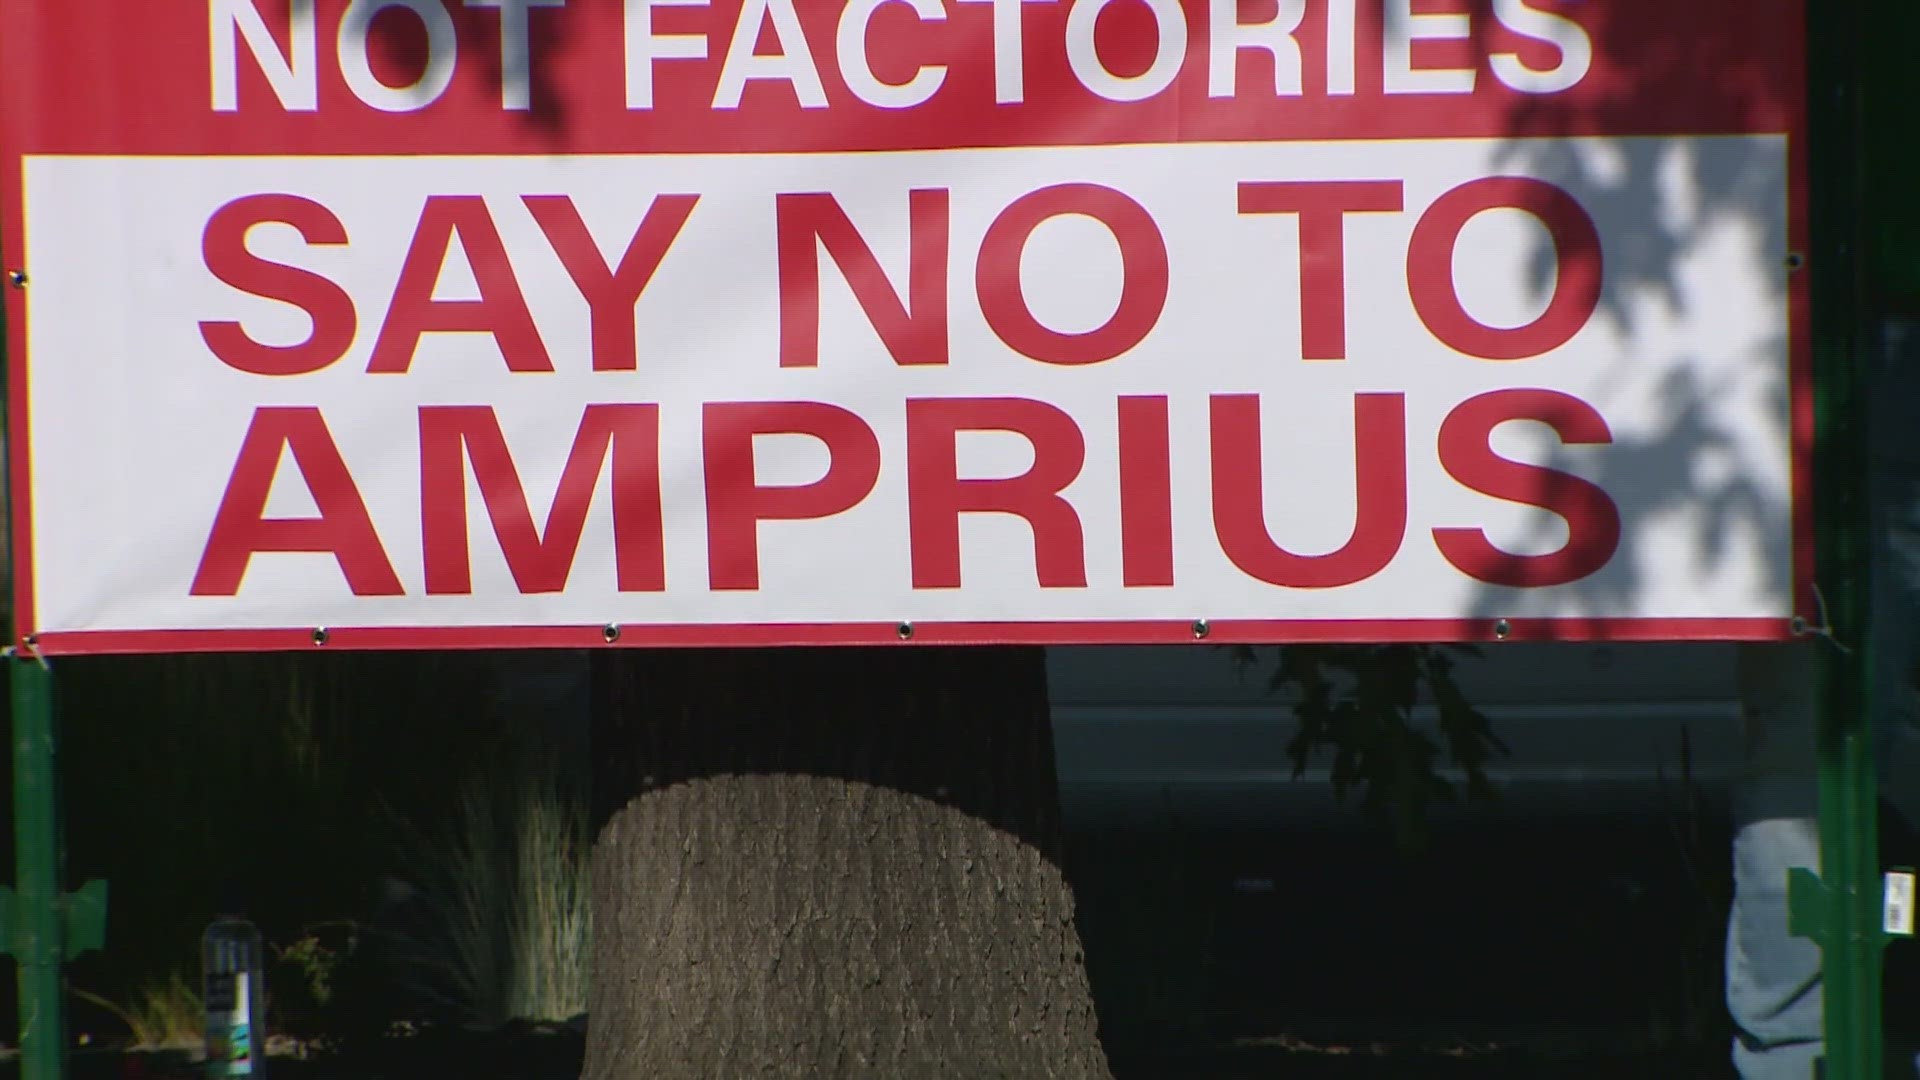 The proposed Amprius facility is part of a federal push to build more clean energy in the United States, but neighbors fear the implications of a factory next door.